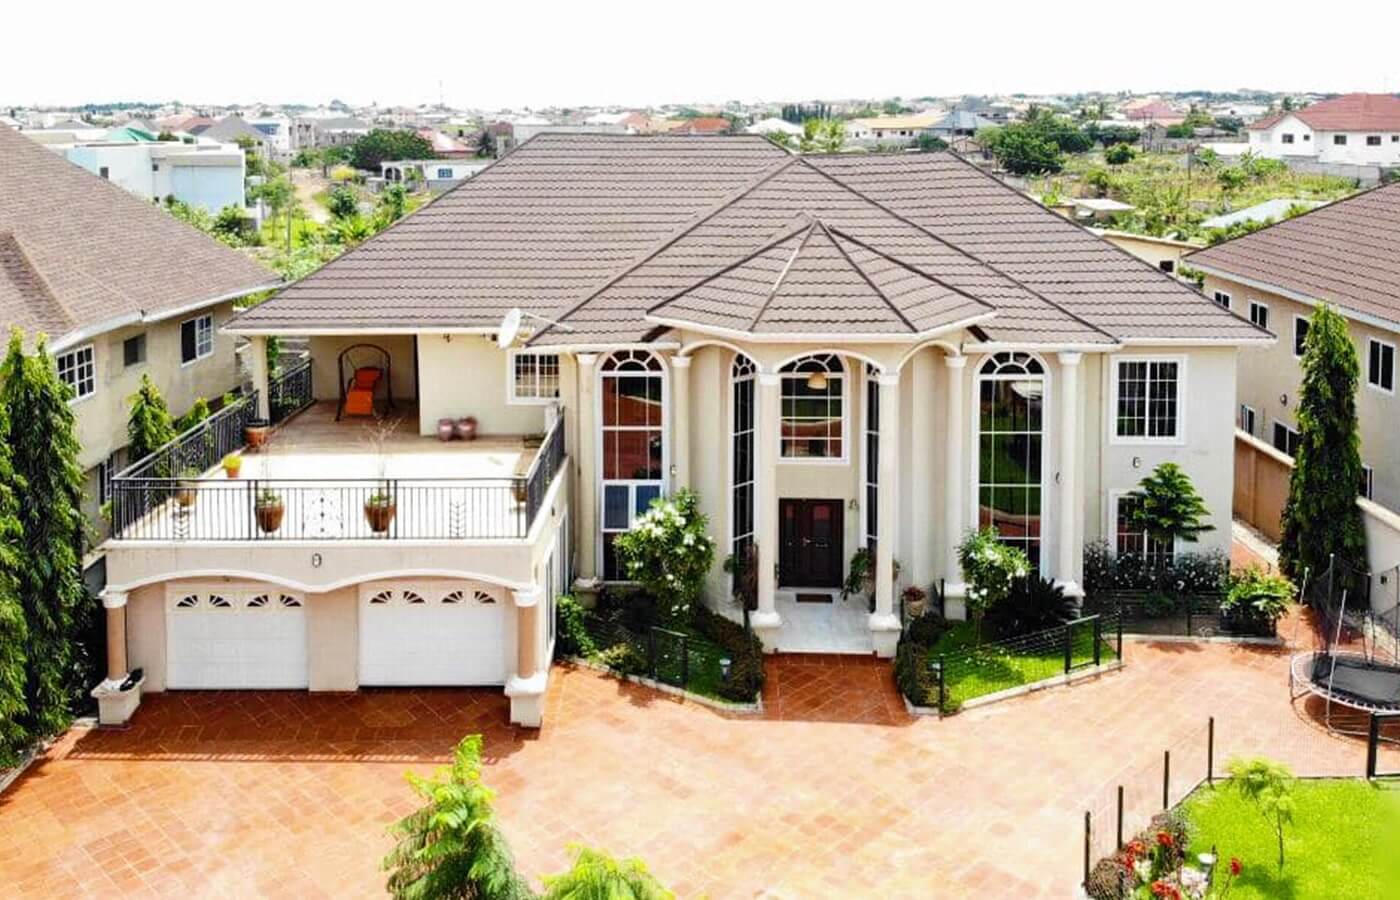 7 Reasons Why You Should Buy a House in East Legon, Ghana